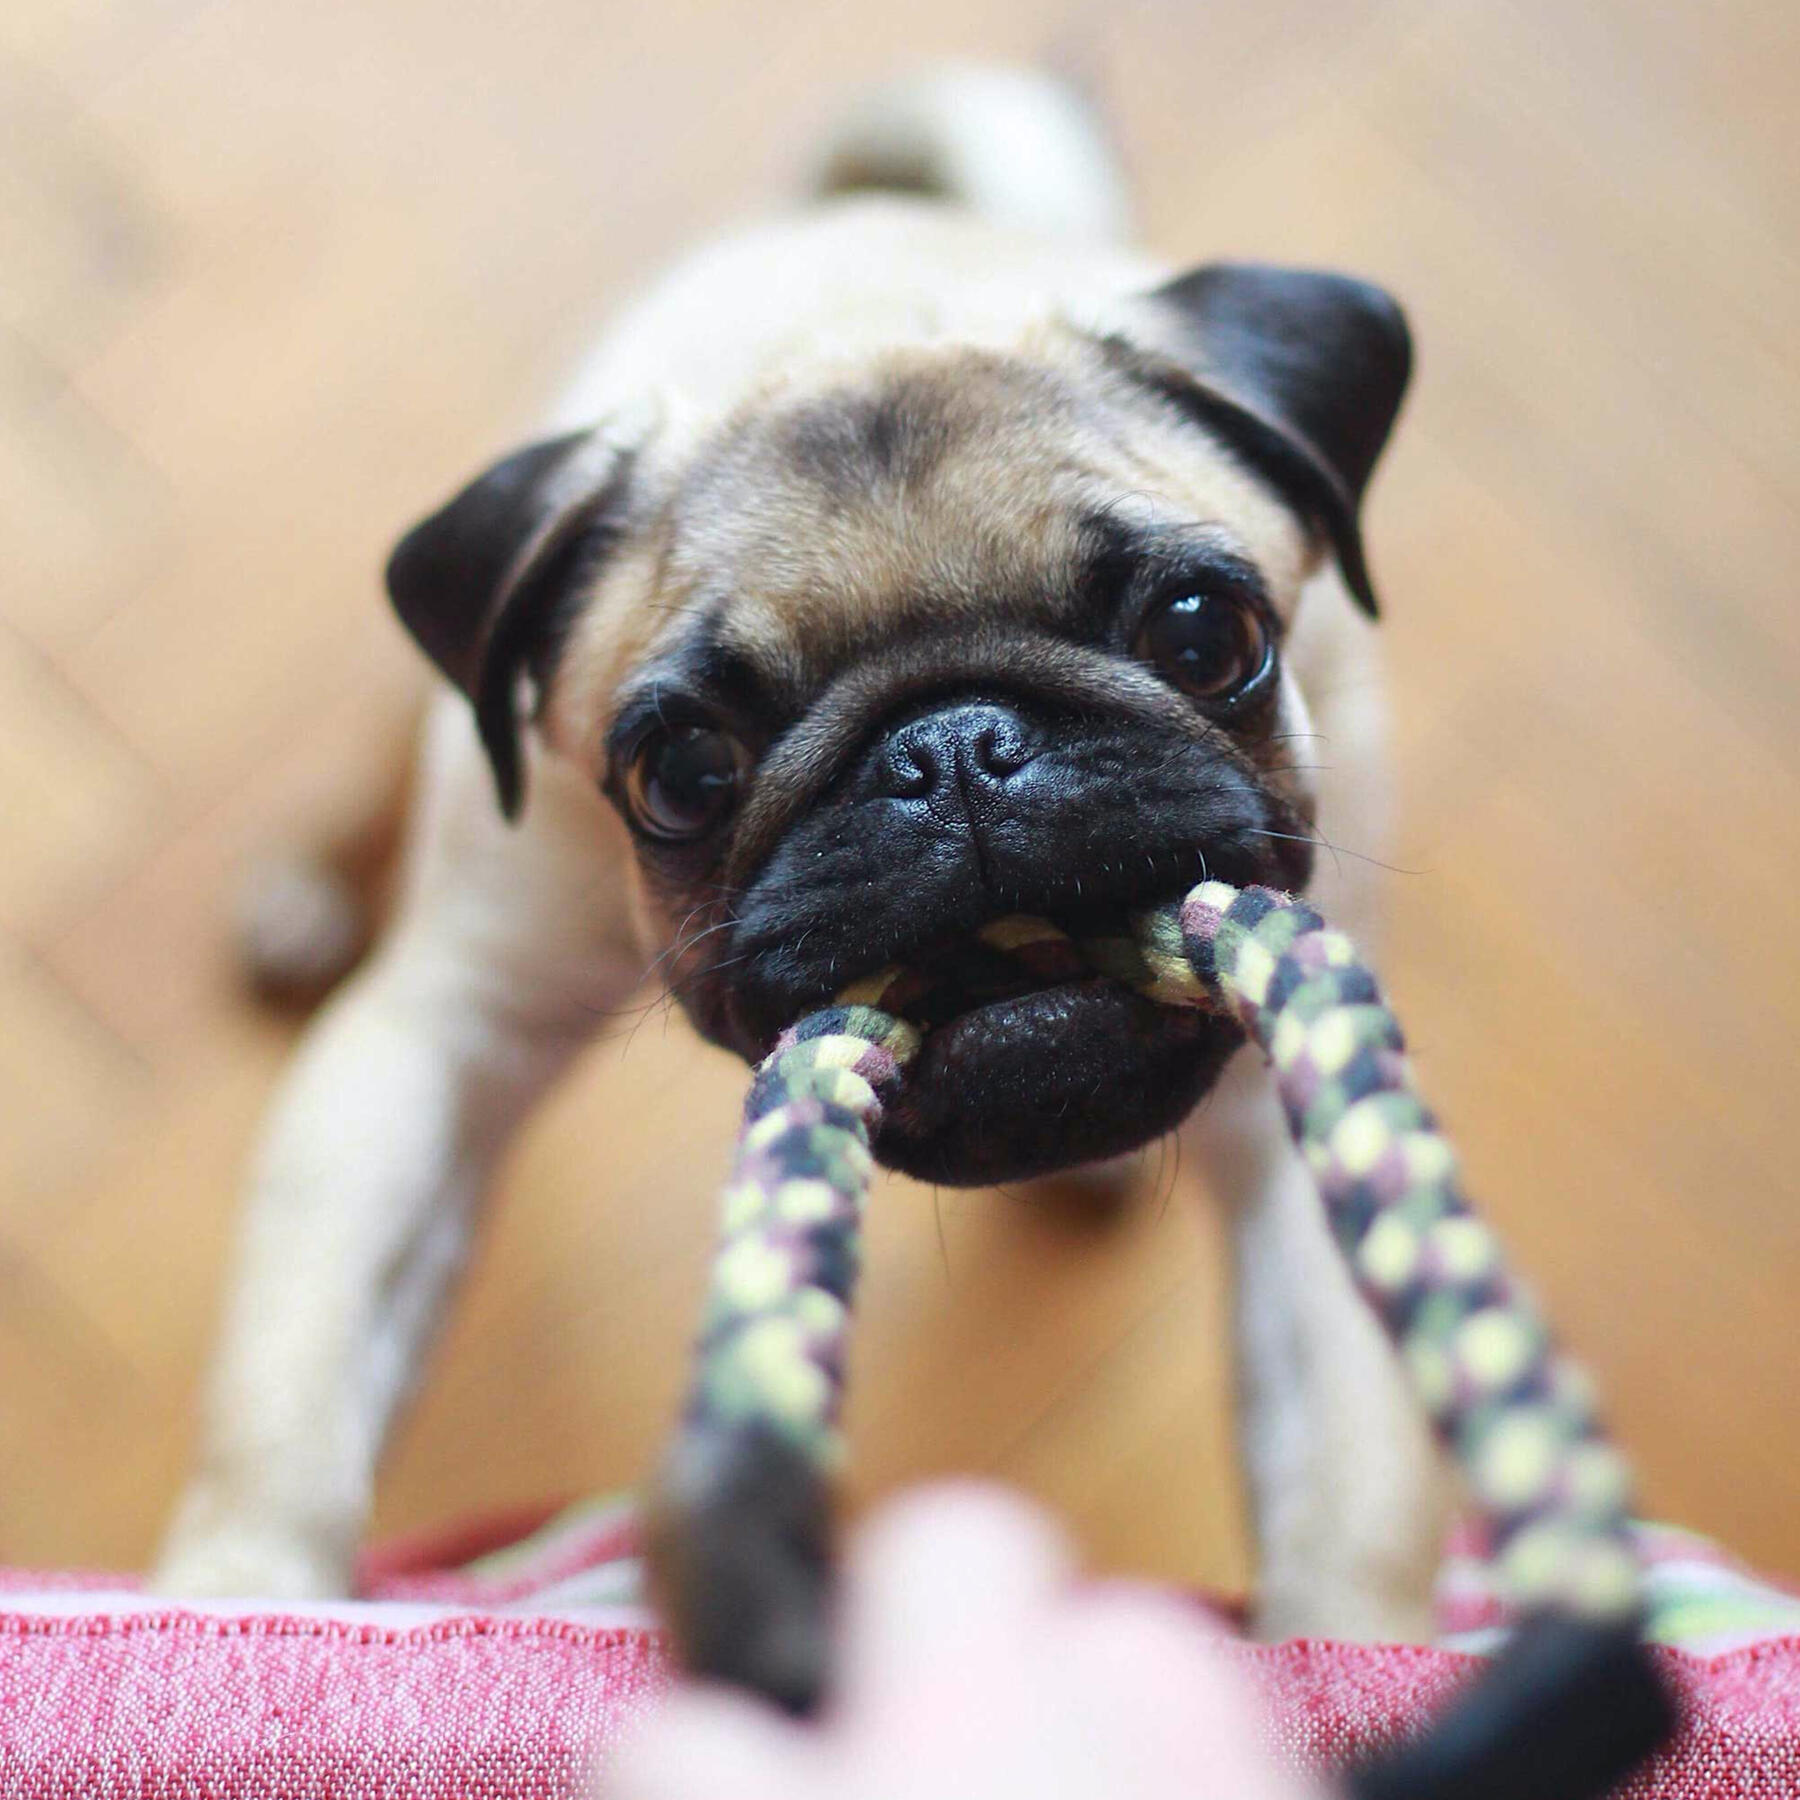 A Pug dog playing tug-of-war with a person via a colorfully braided rope toy.